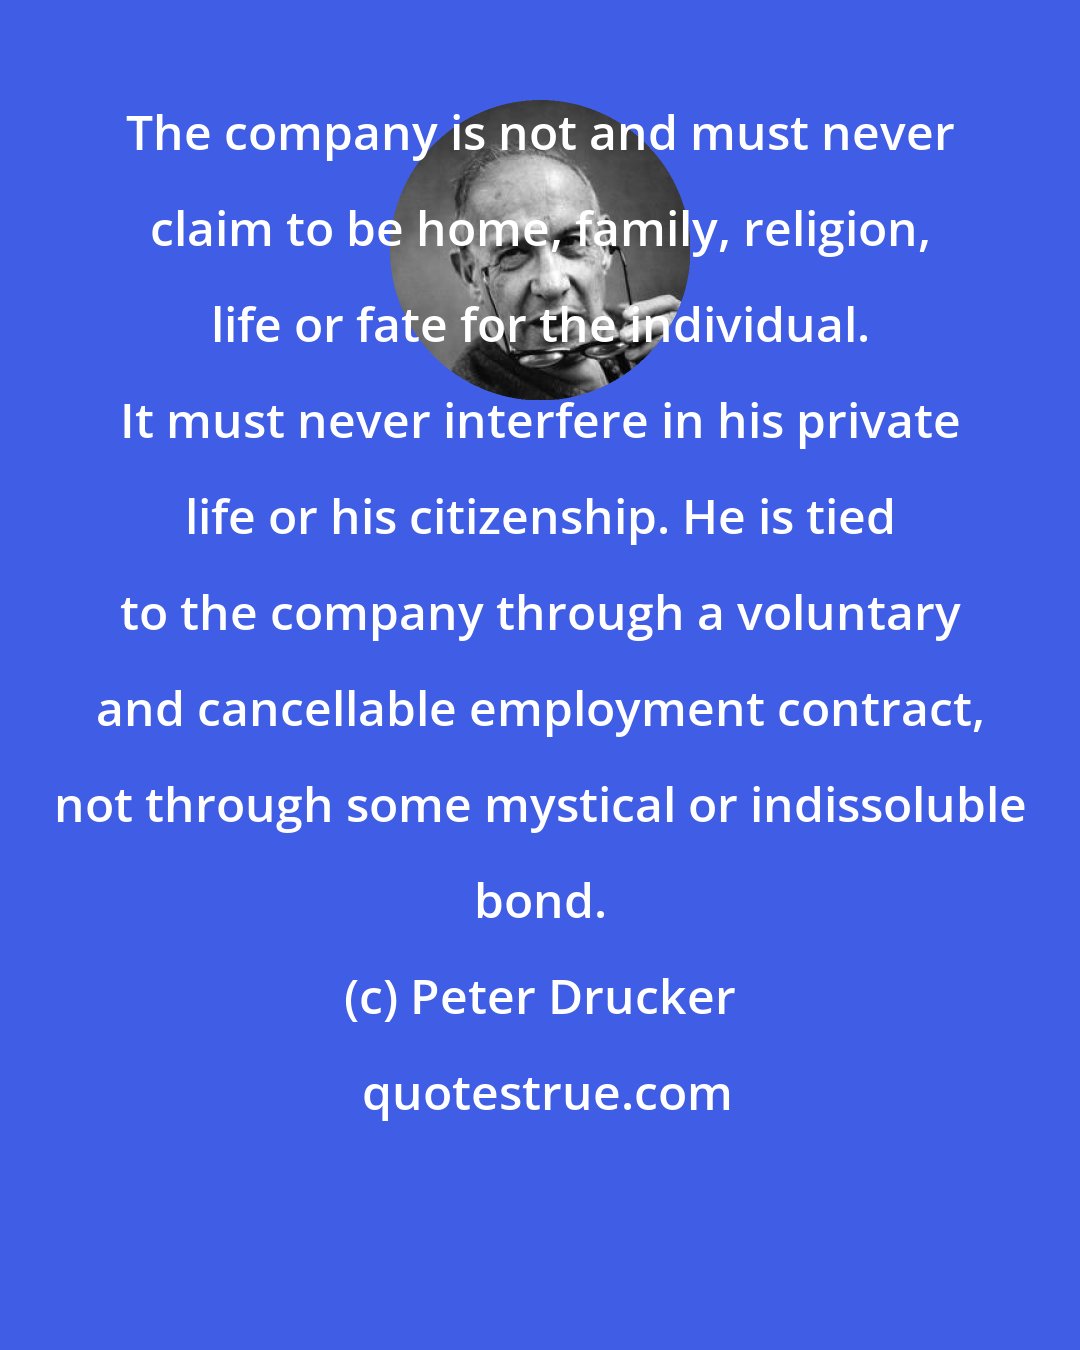 Peter Drucker: The company is not and must never claim to be home, family, religion, life or fate for the individual. It must never interfere in his private life or his citizenship. He is tied to the company through a voluntary and cancellable employment contract, not through some mystical or indissoluble bond.